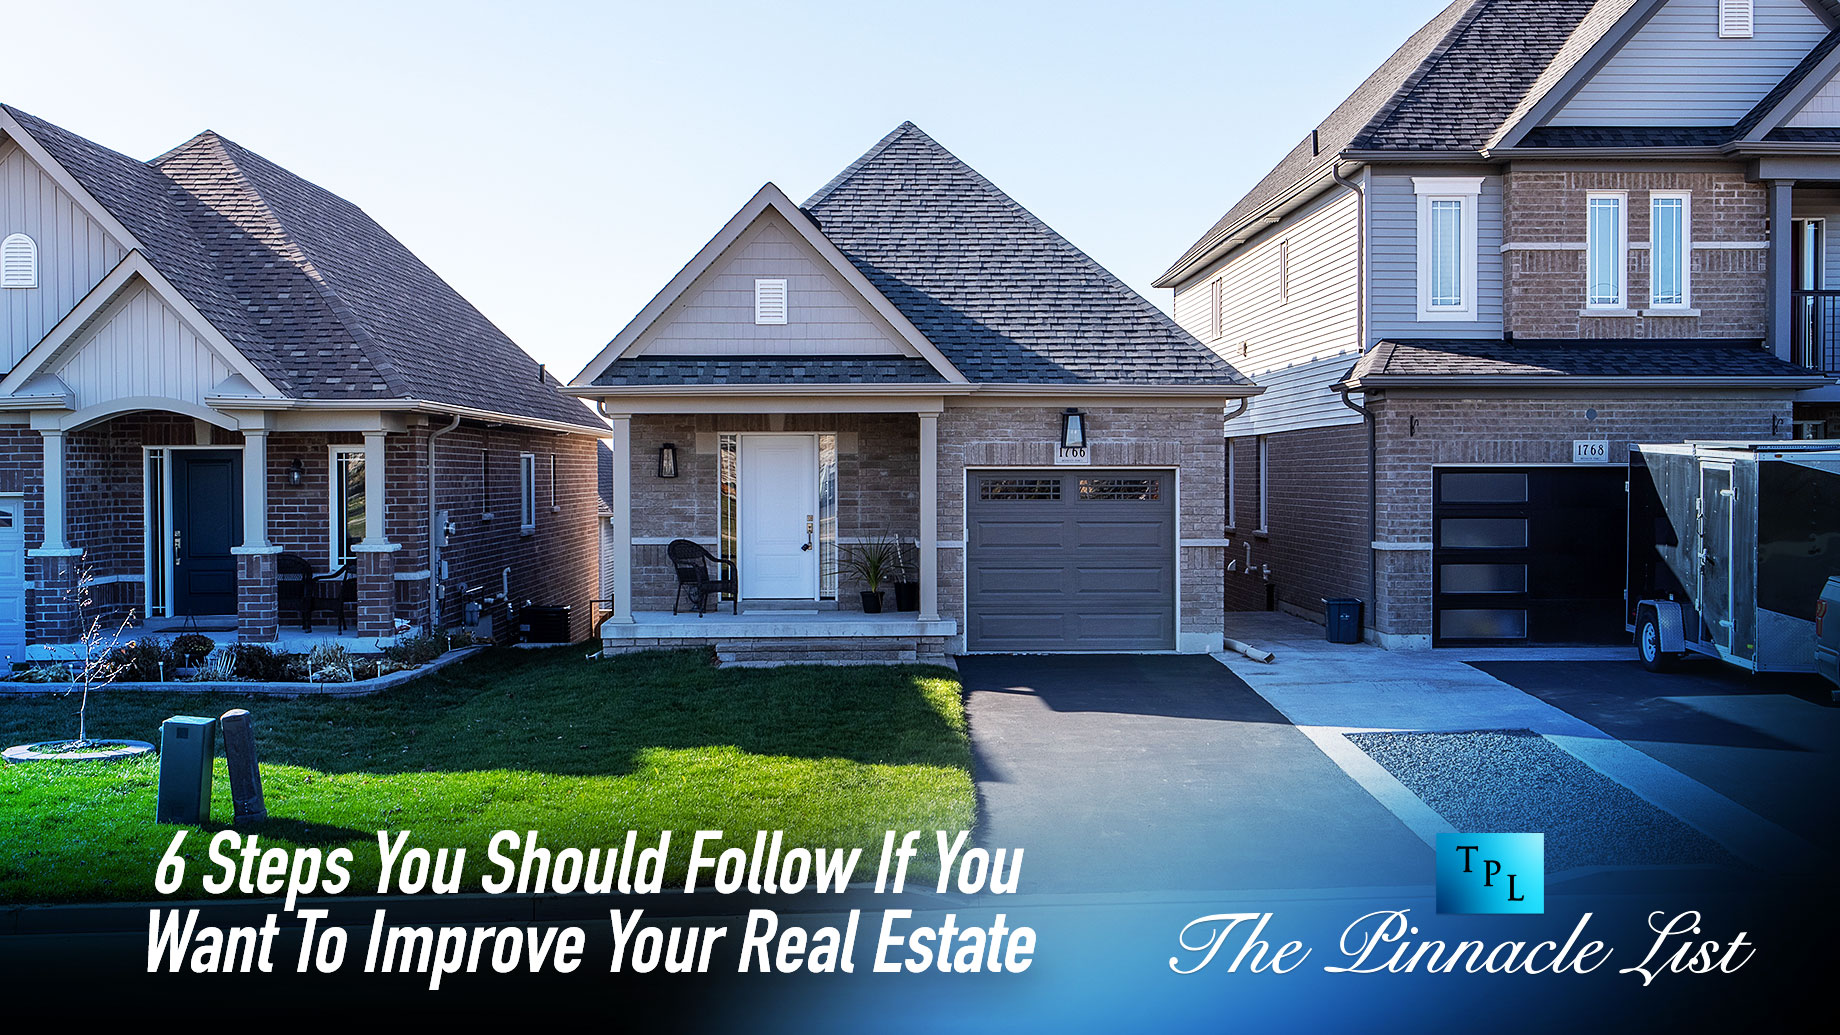 6 Steps You Should Follow If You Want To Improve Your Real Estate